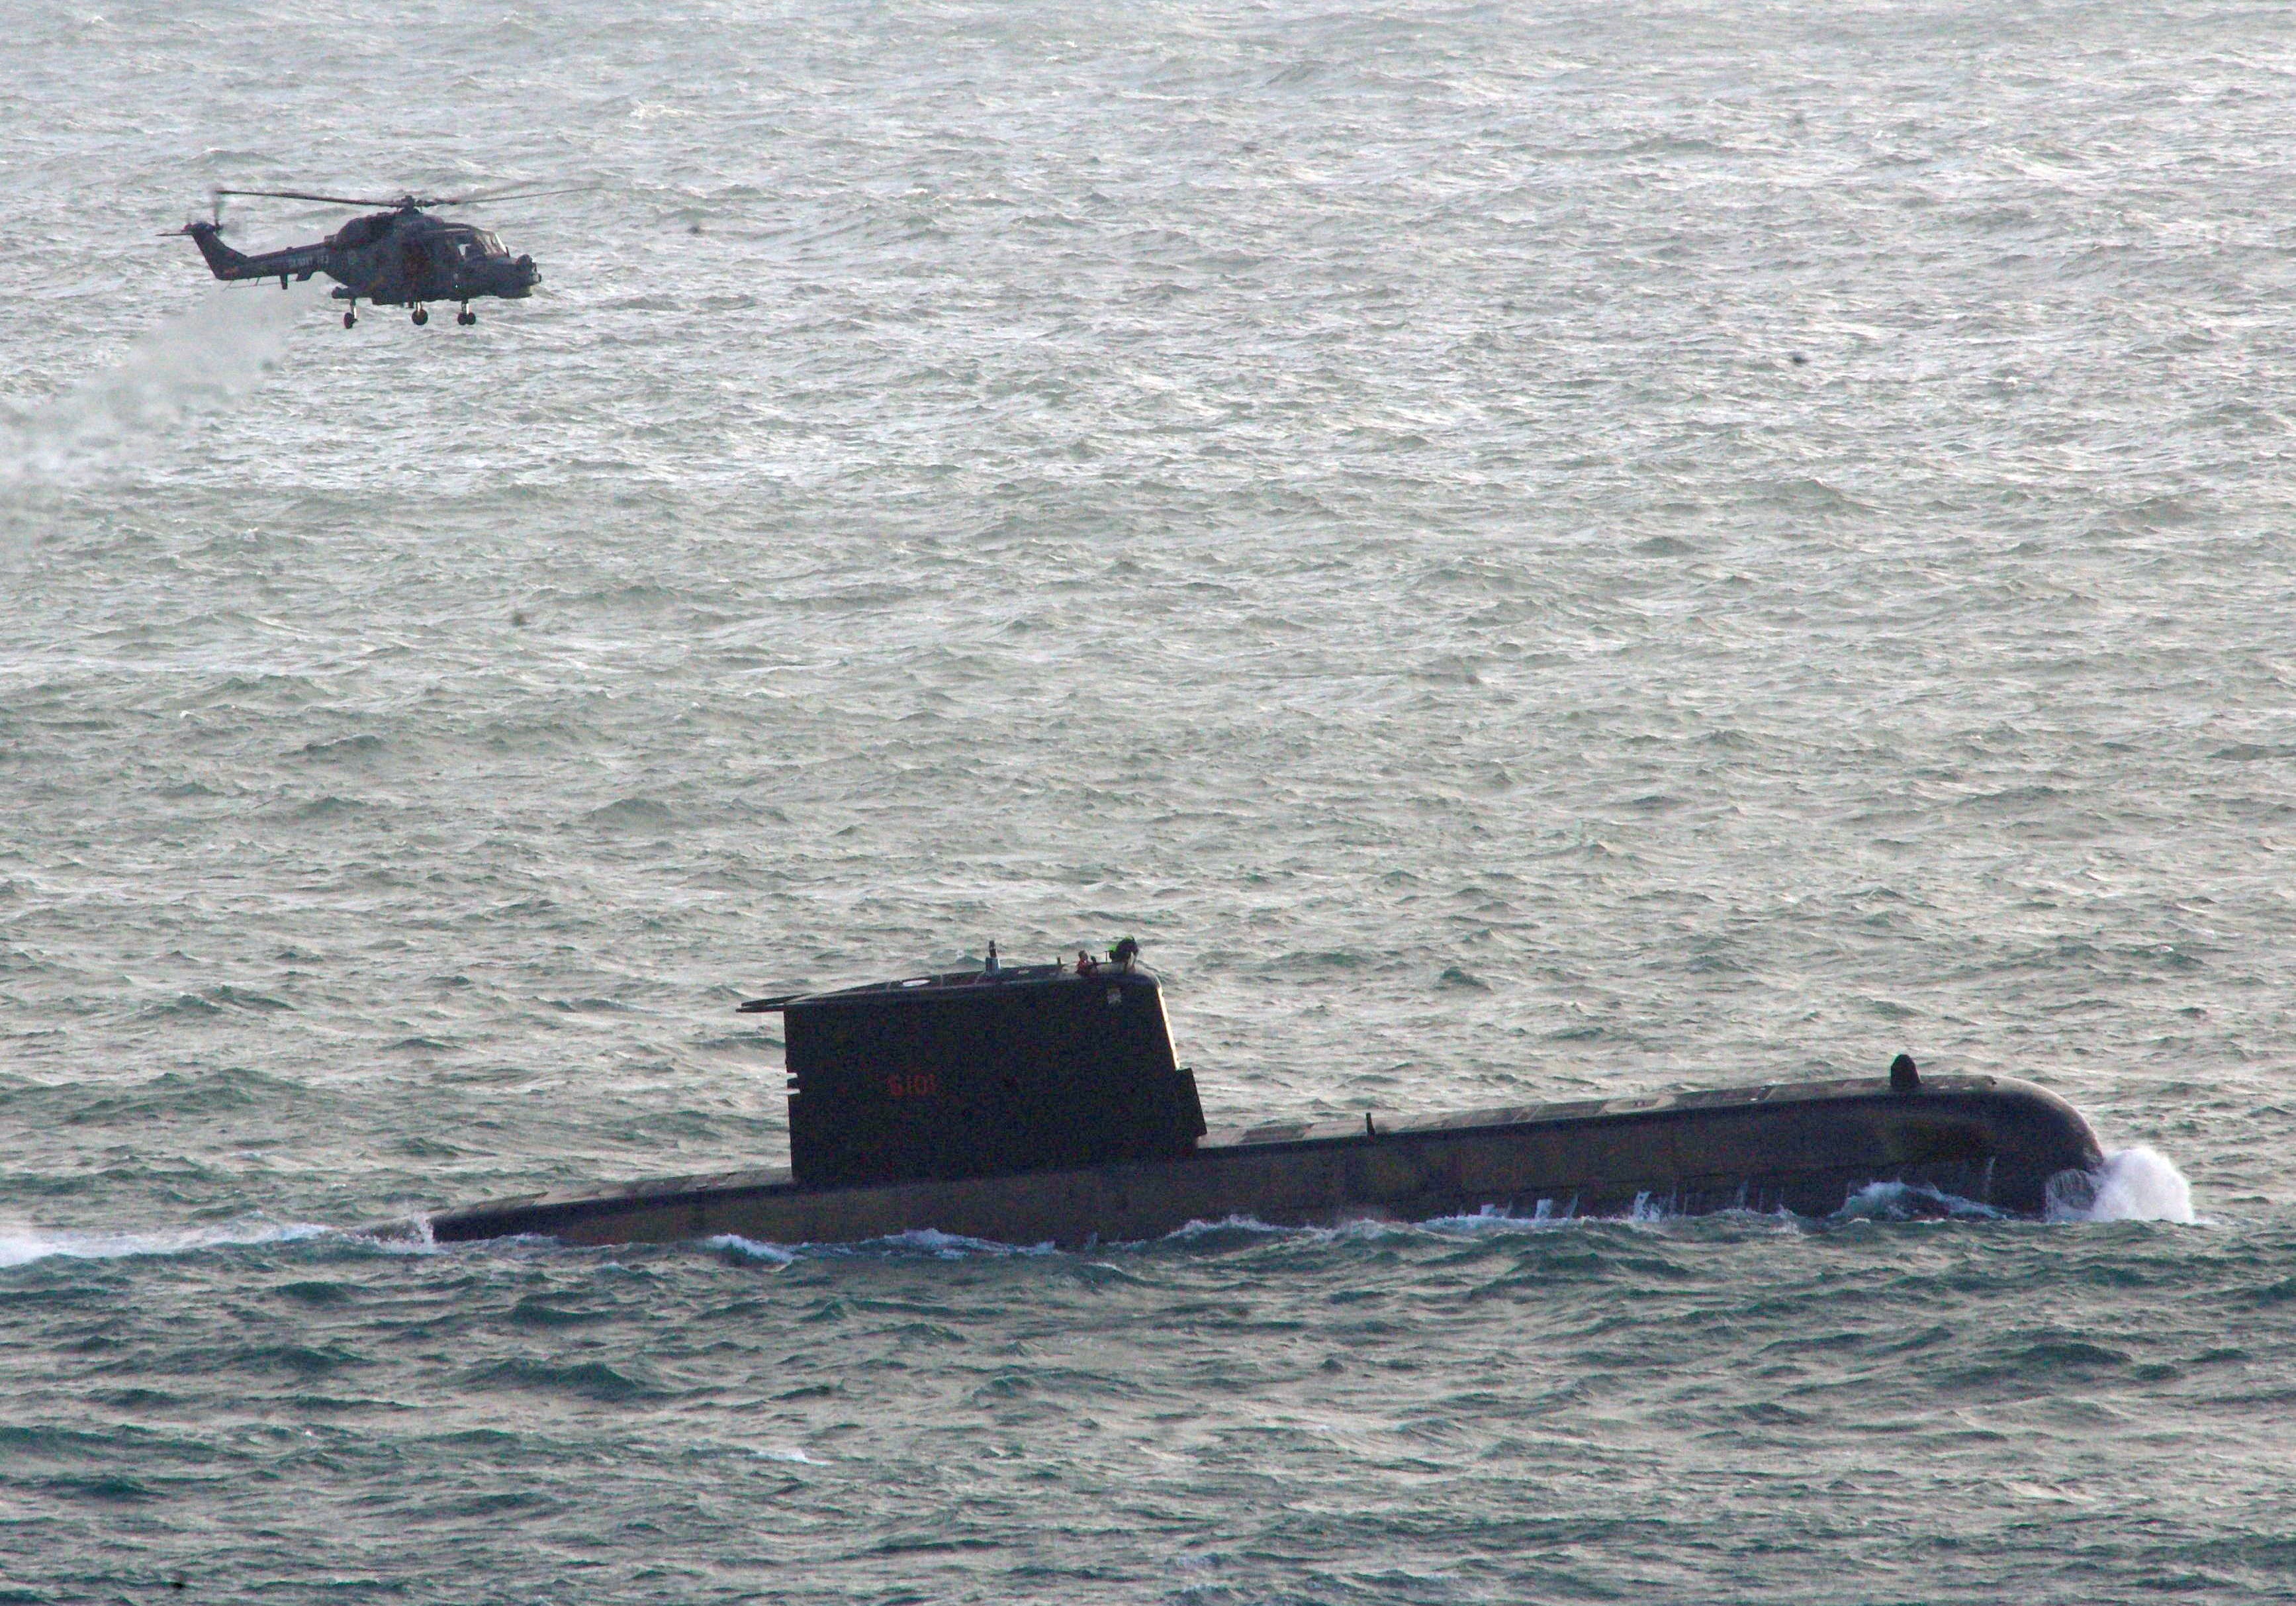 Seven submariners were swept off the vessel’s deck